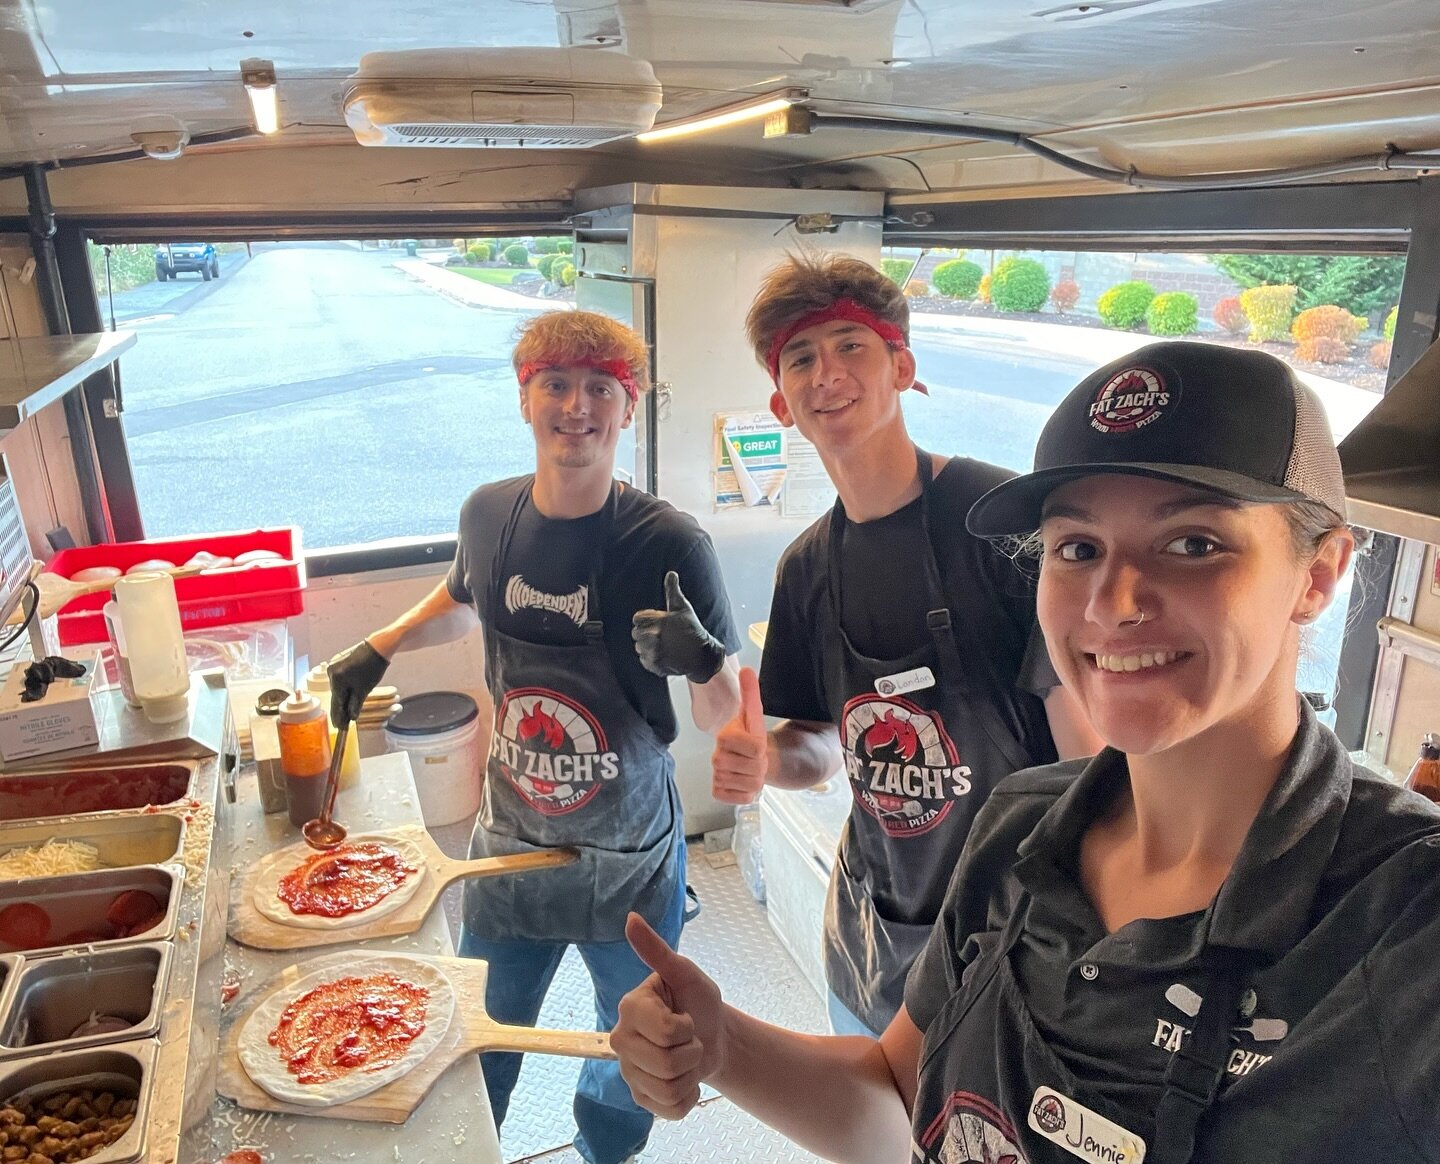 HOAs, Businesses or private events - book our food truck and we will bring the party! 

fatzachspizza.com
.
.
.
.
#eatlocal #smallbusiness #downtown #smallbusiness #puyallup #pnw #pizza #yummy #instagood  #food #foodporn #catering #mobile #sumner #ph